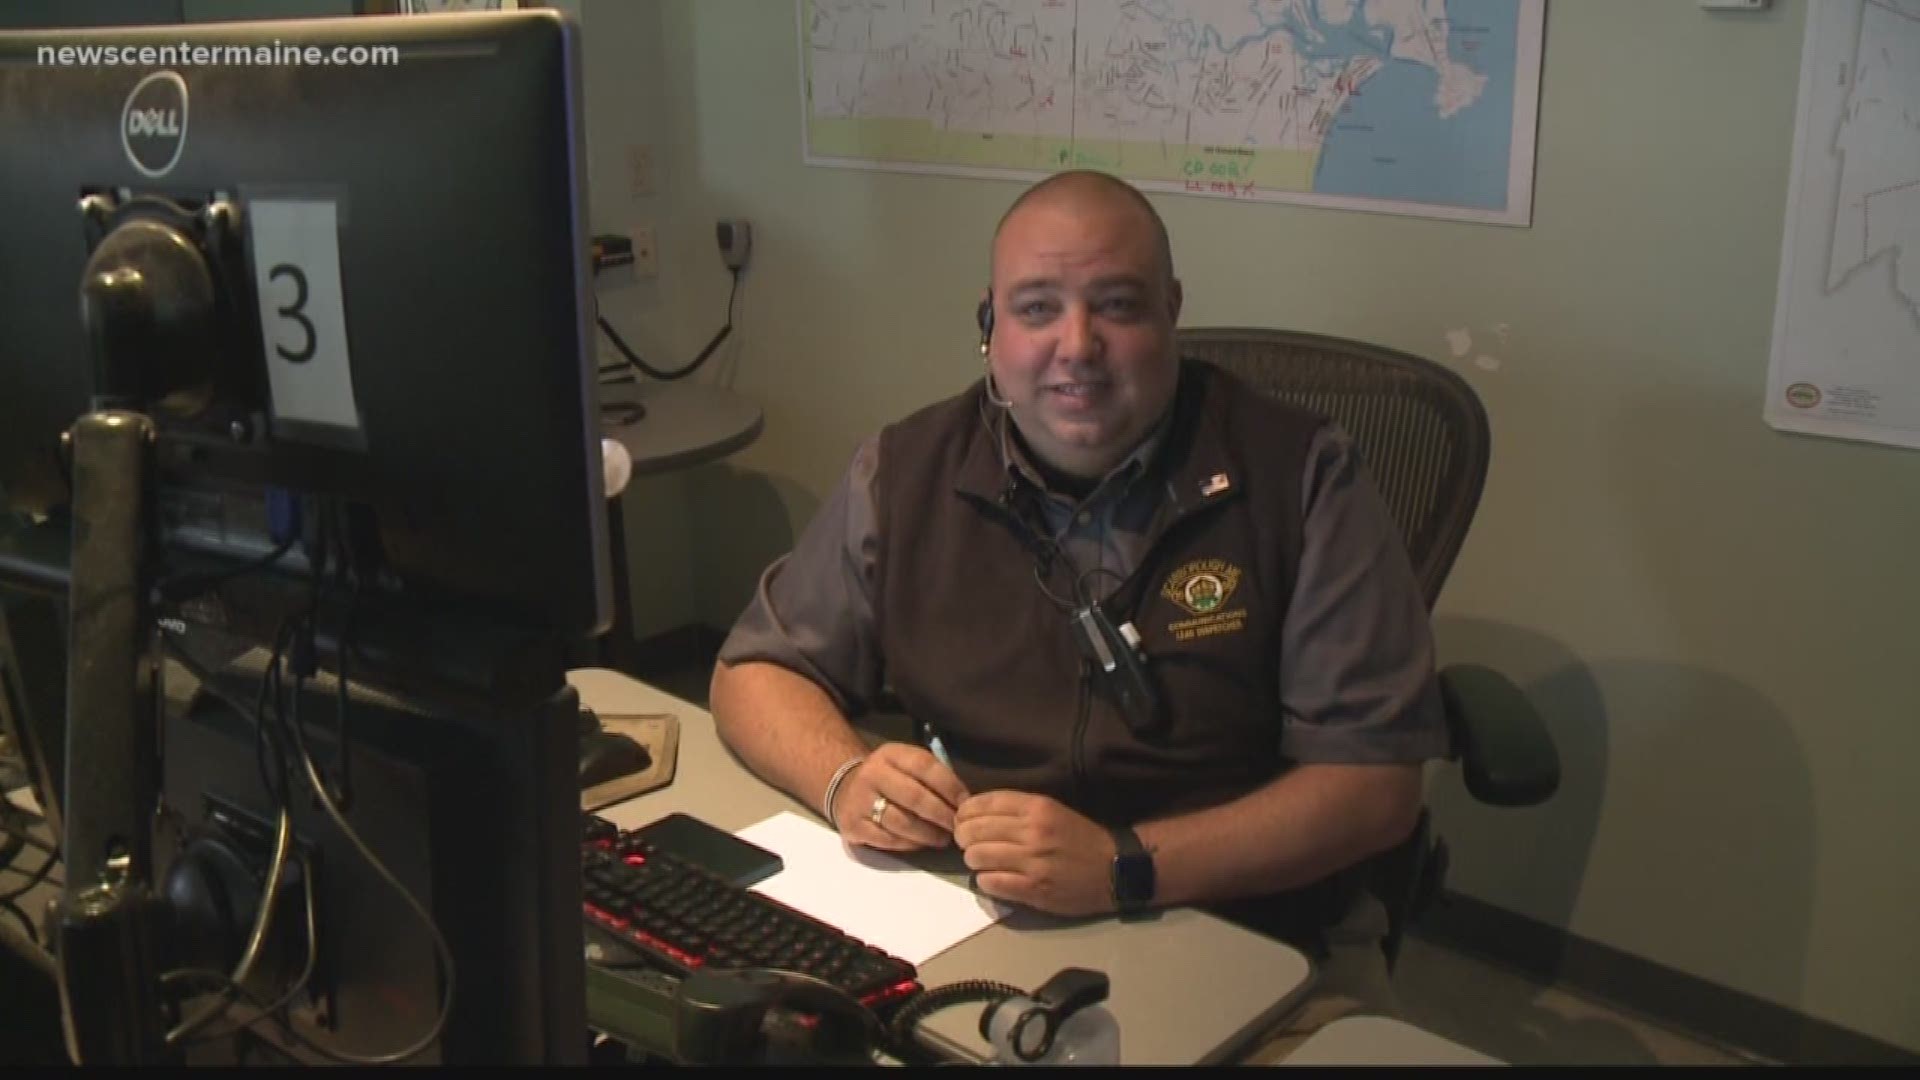 NOW: Day in the Life: Emergency dispatcher